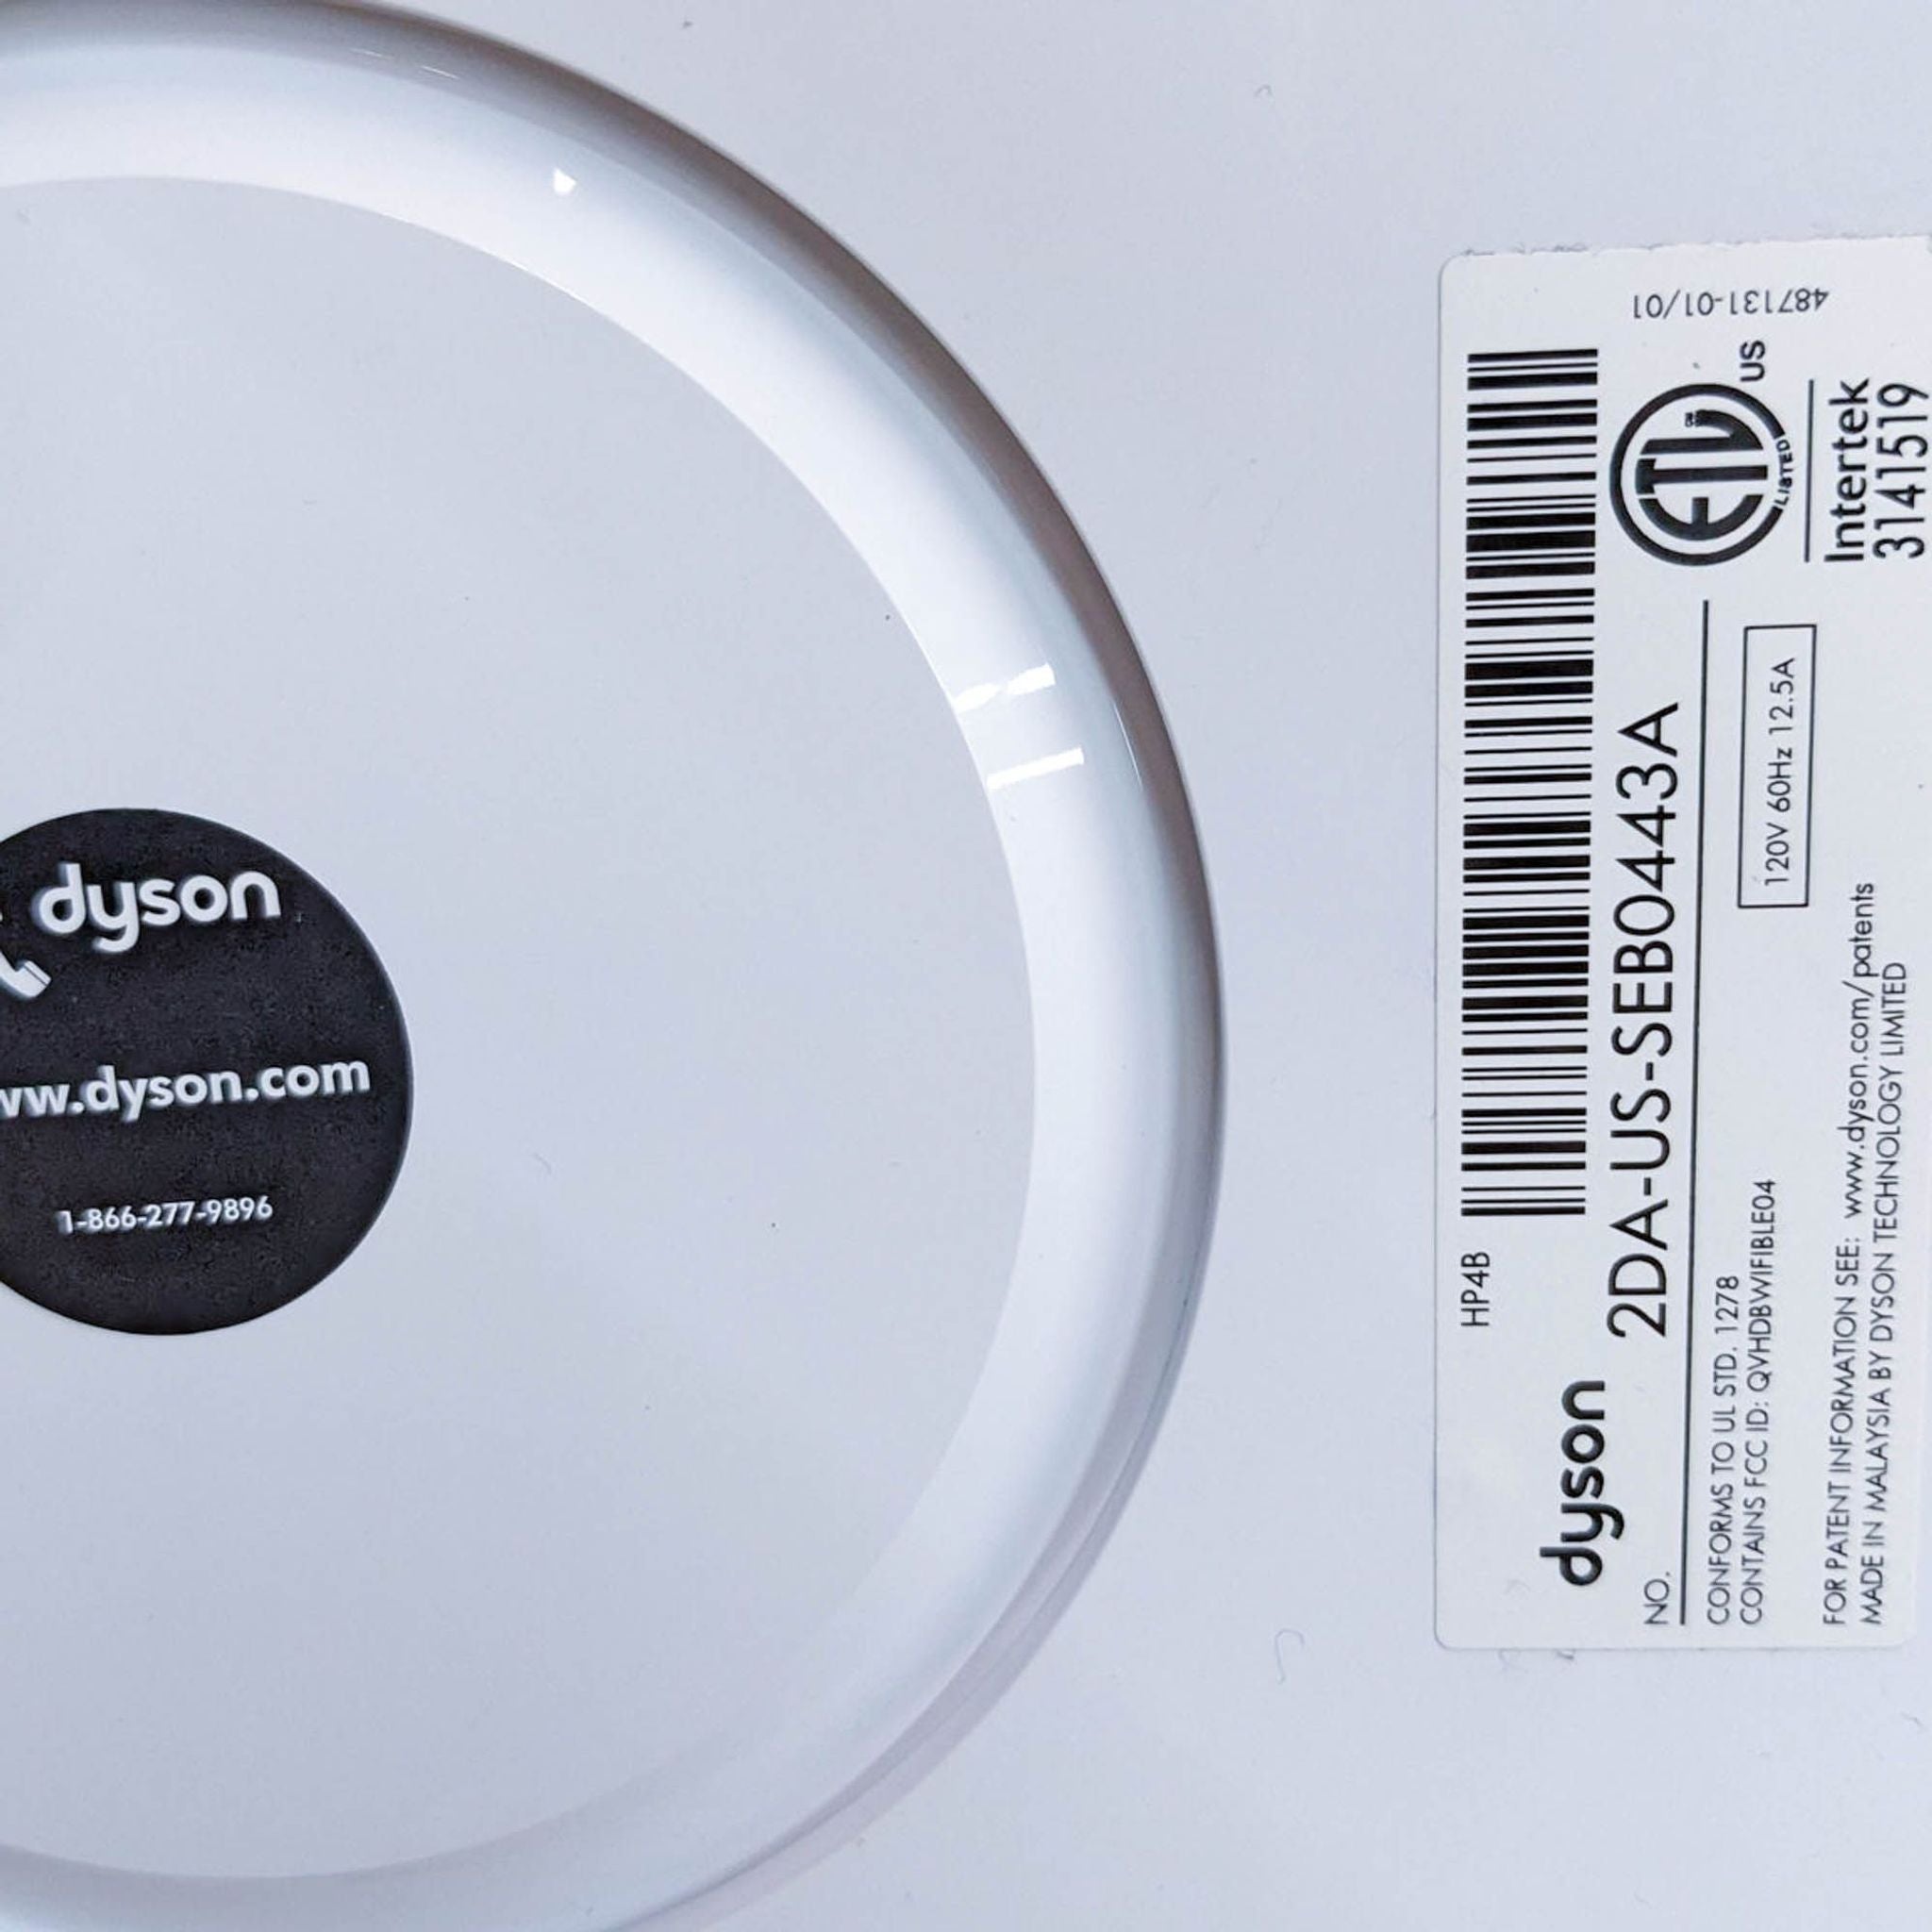 Label showing Dyson brand and model details on the base of the Purifier Cool Gen1 TP10, with a website and contact number.